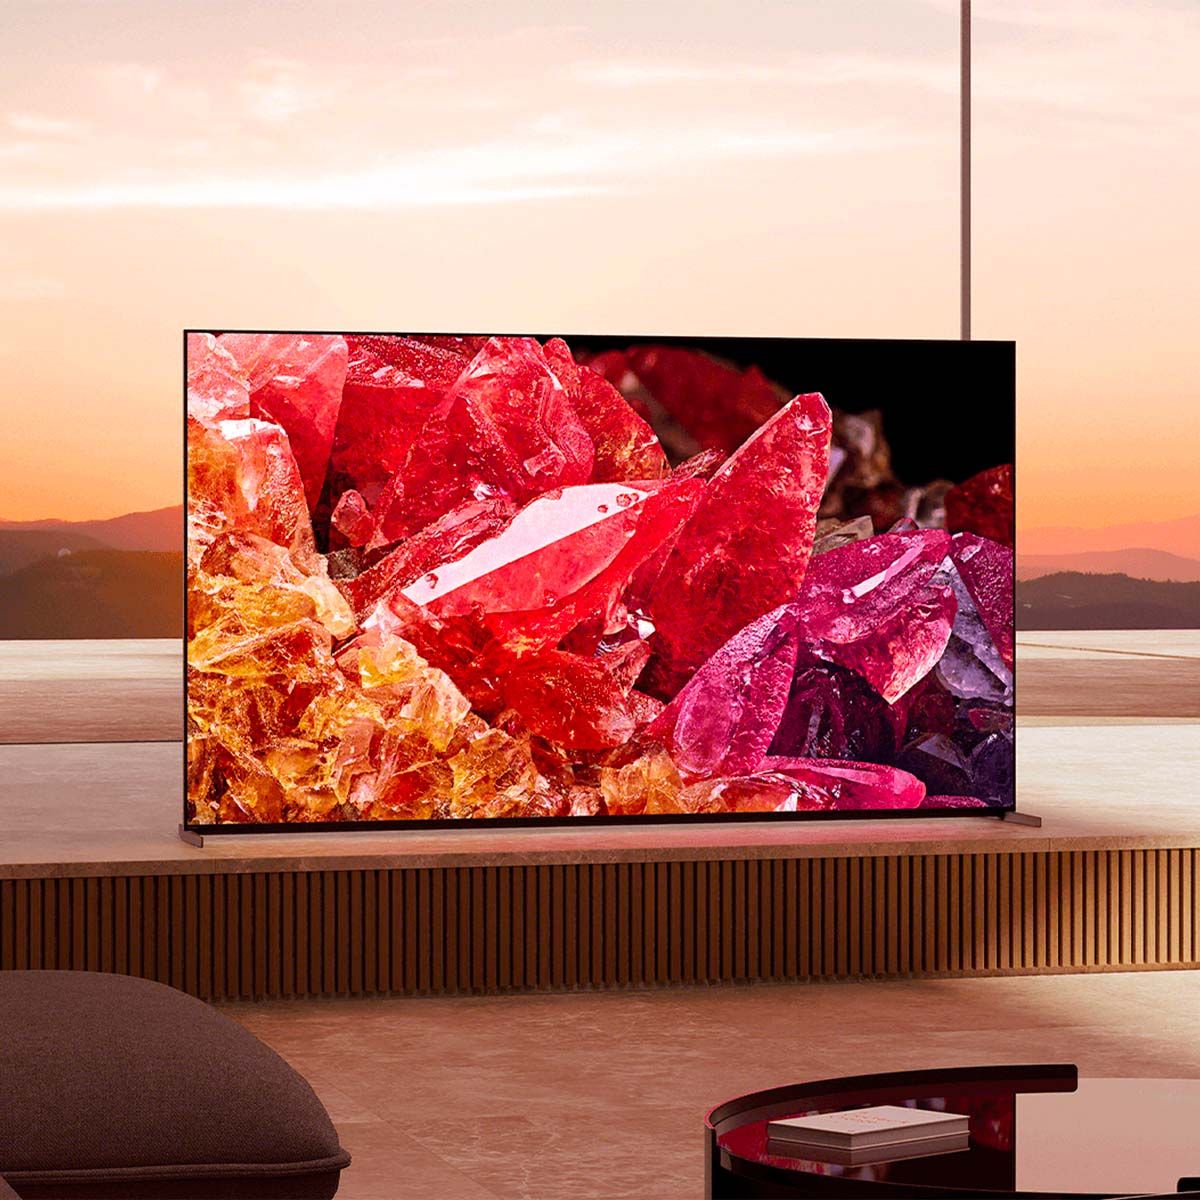 Sony BRAVIA XR X95K 4K LED TV, on a media stand in front of a sunset